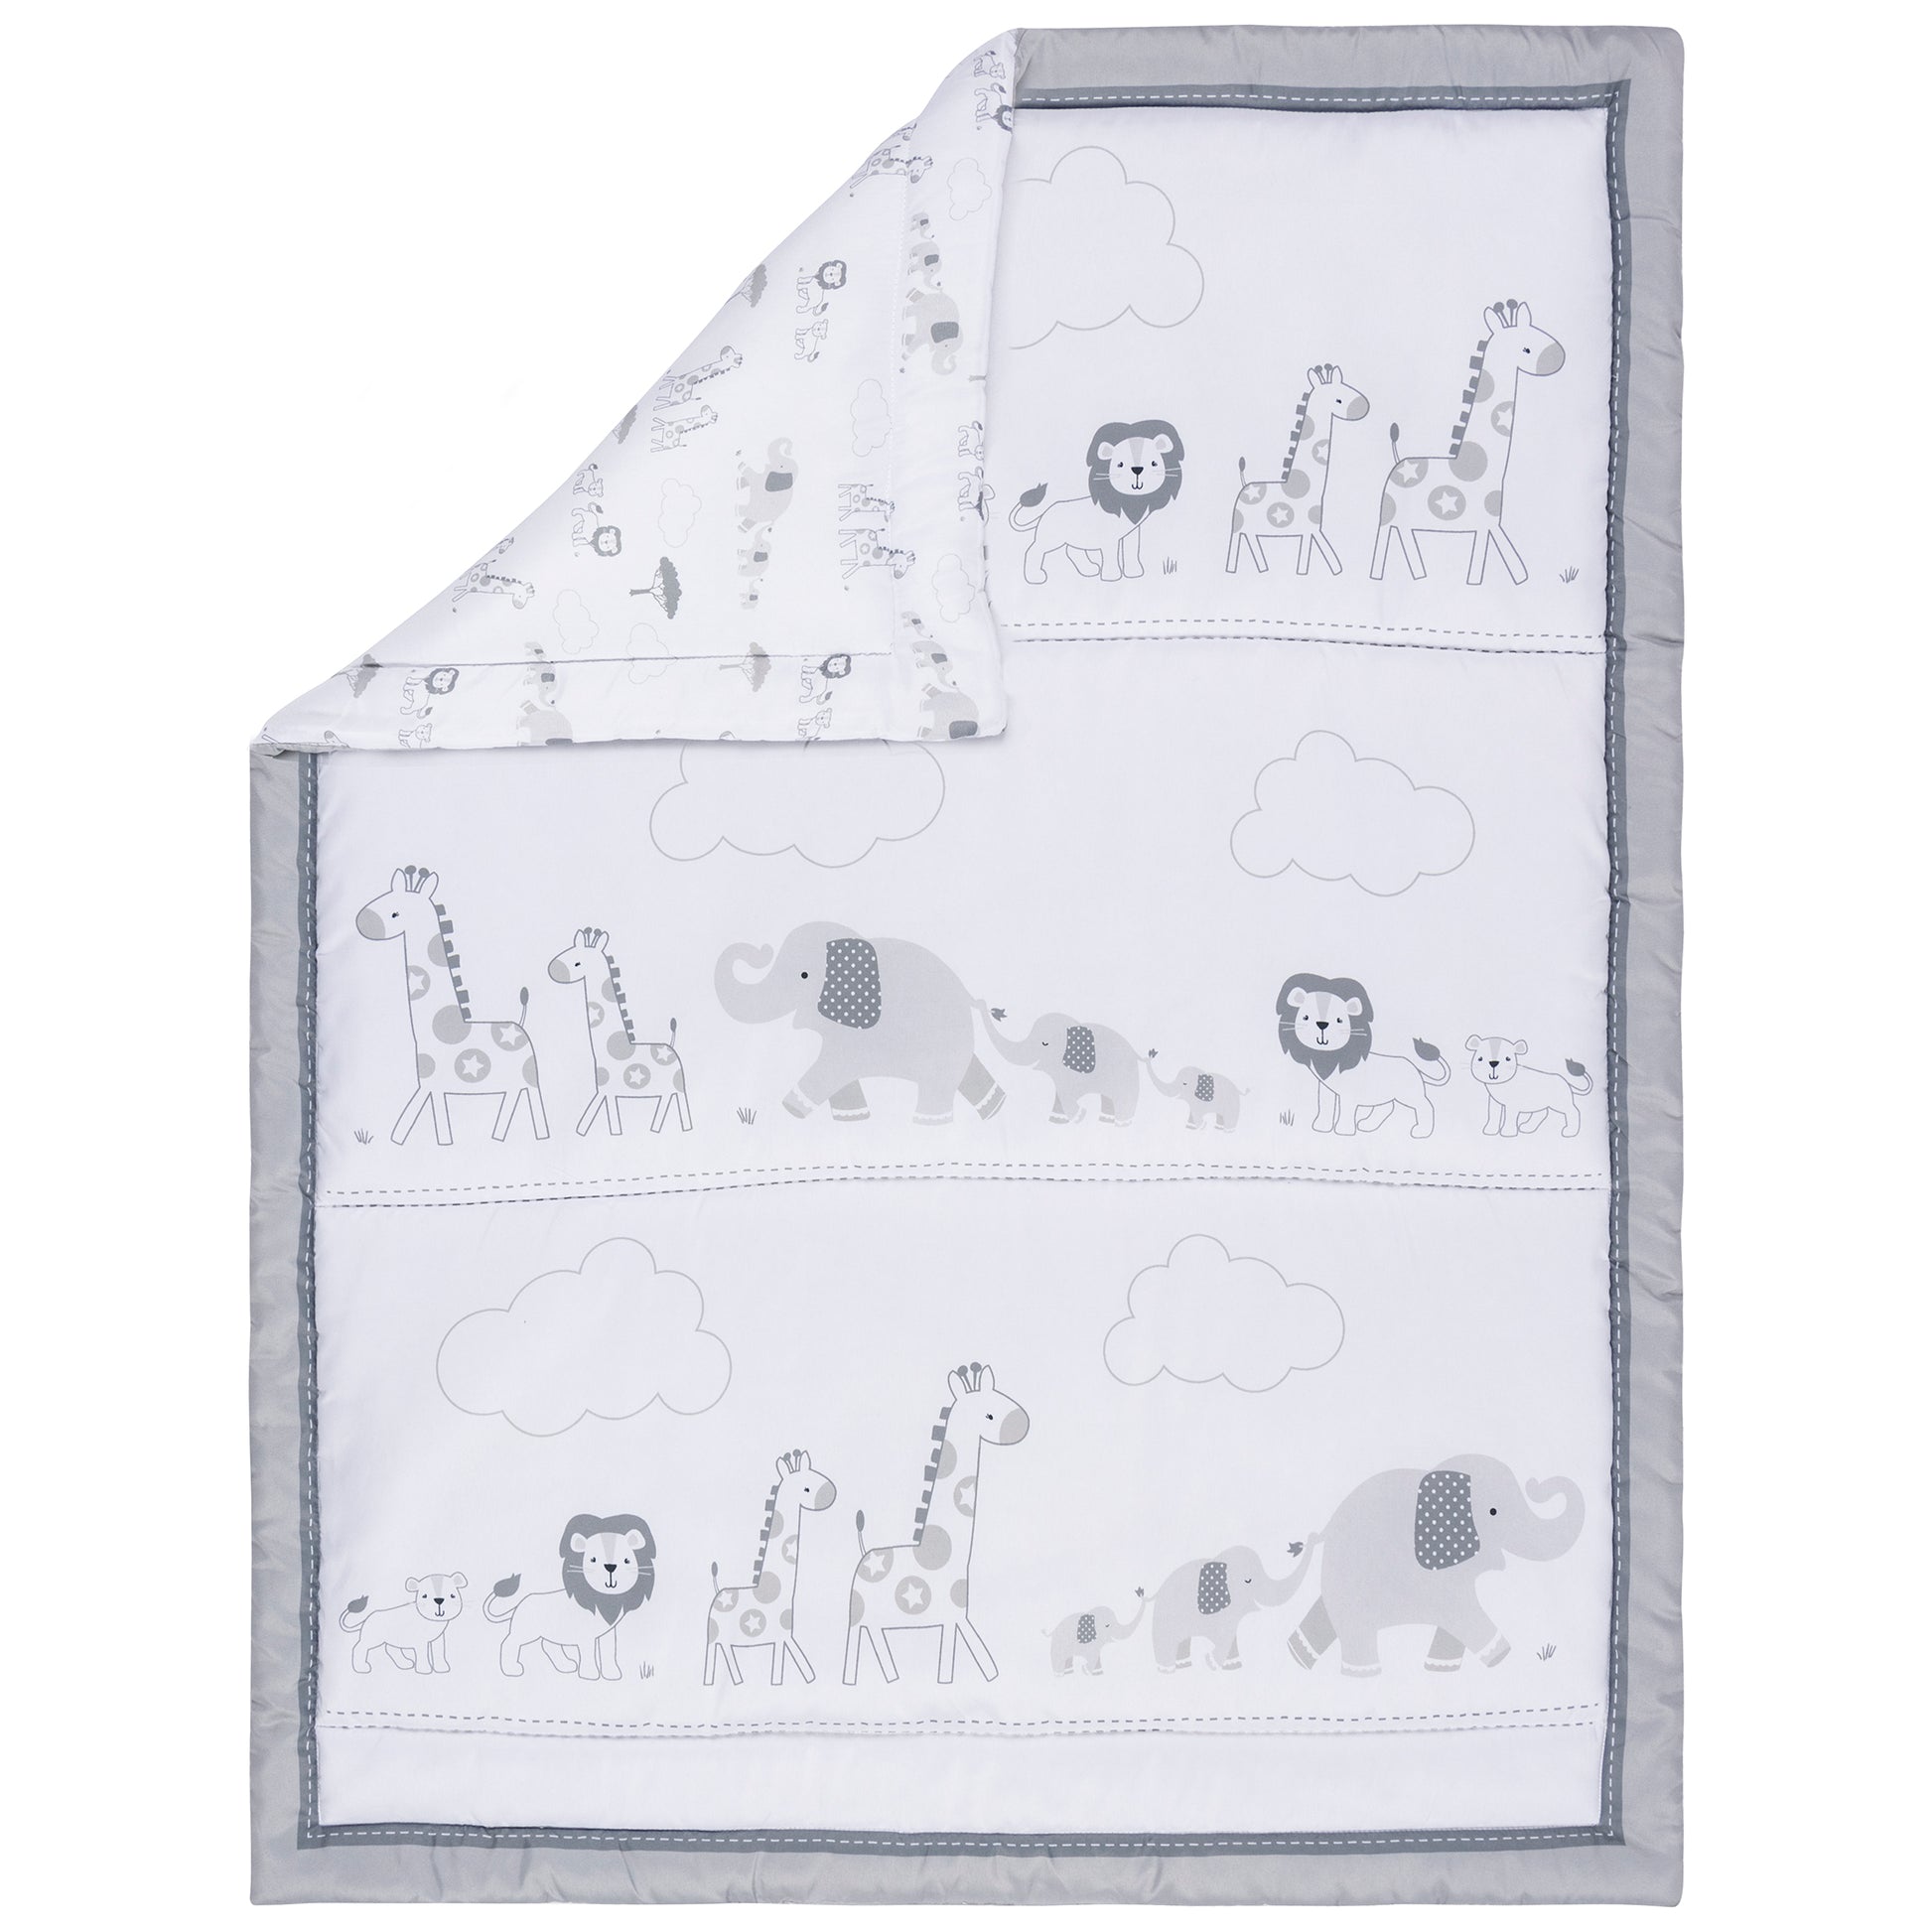 Nursery quilt measures 35 in x 45 in features safari animals on the front walking through the desert in glacier gray, paloma gray and bedtime gray on a white background. The back features the same theme in a small scatter print.